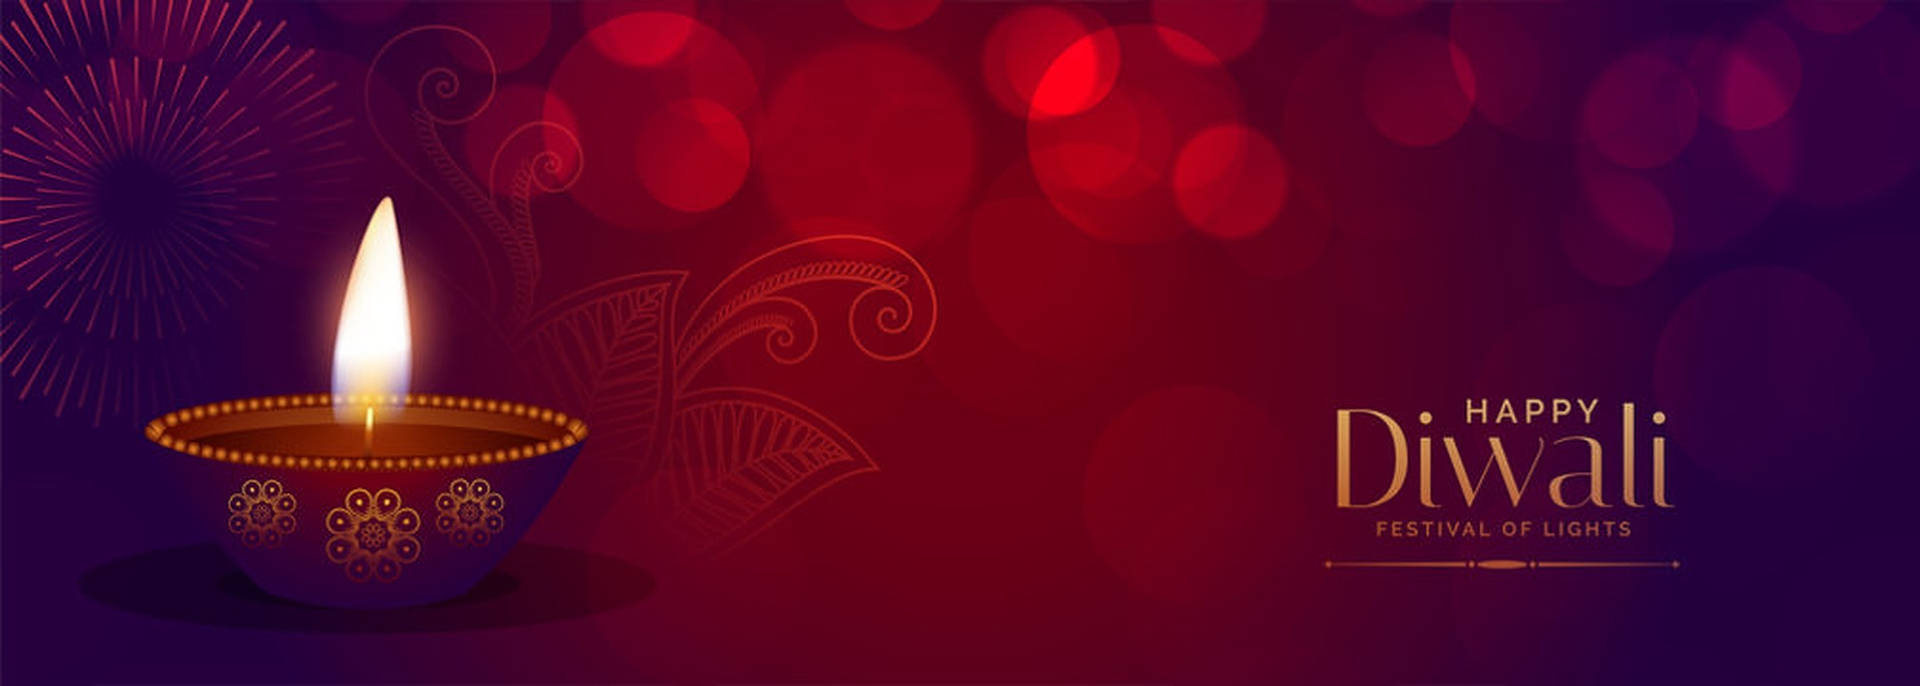 Diwali Red Poster Background